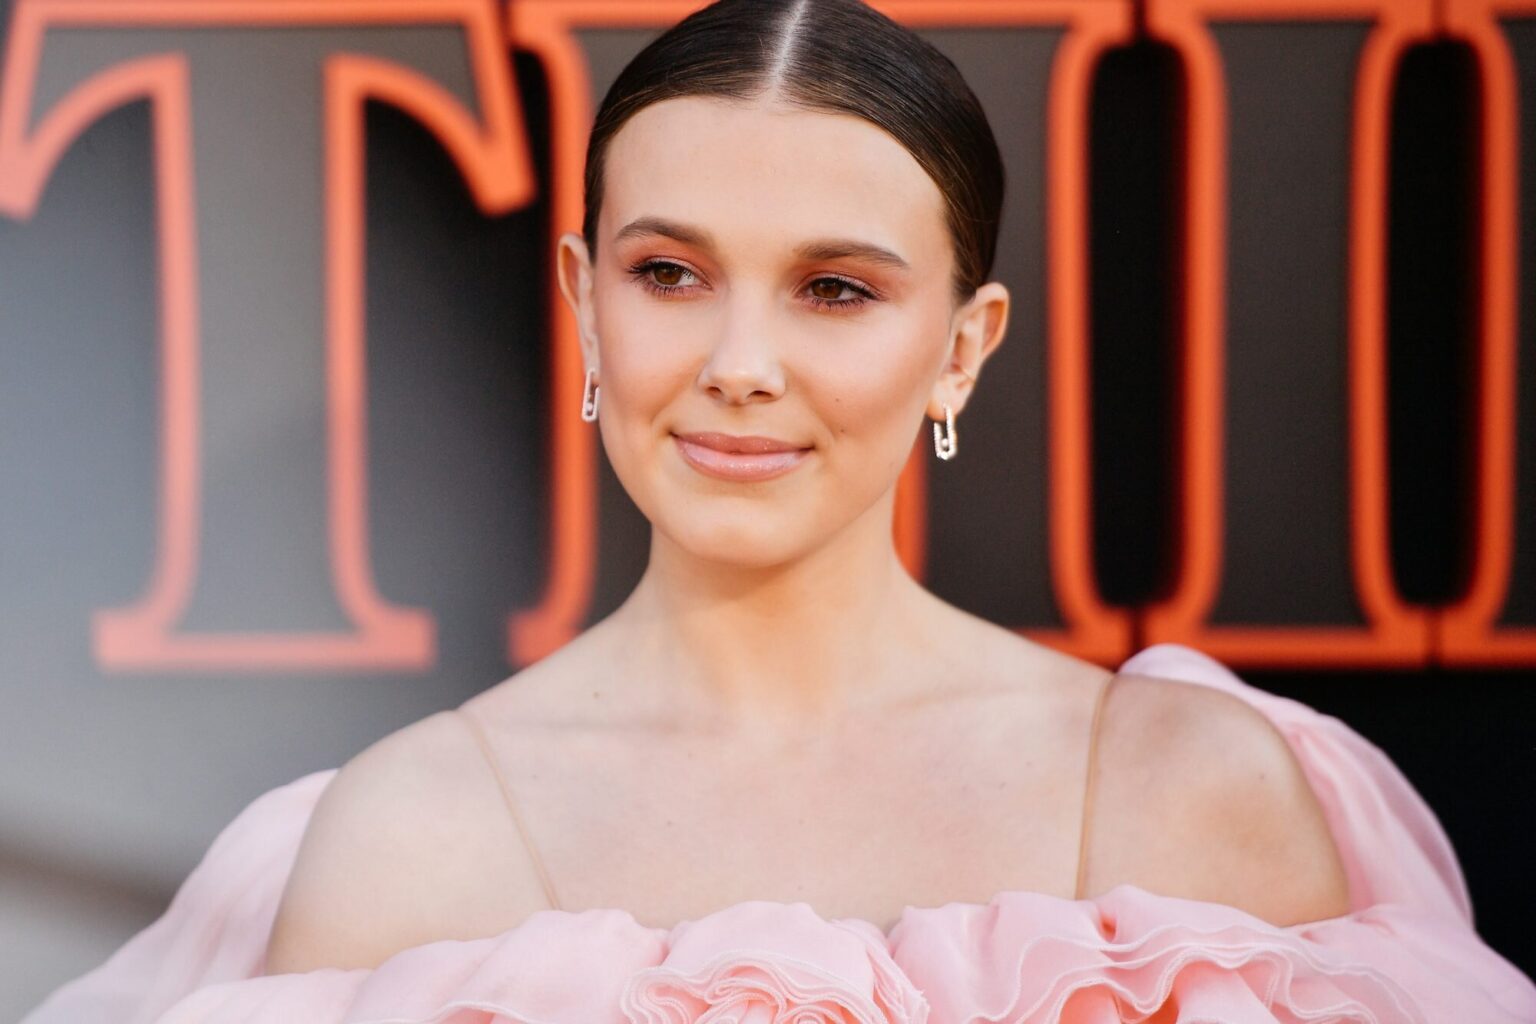 Millie Bobby Brown is dating which rock legend's son? Discover the 'Stranger Things' star's new boyfriend thanks to her latest IG post!